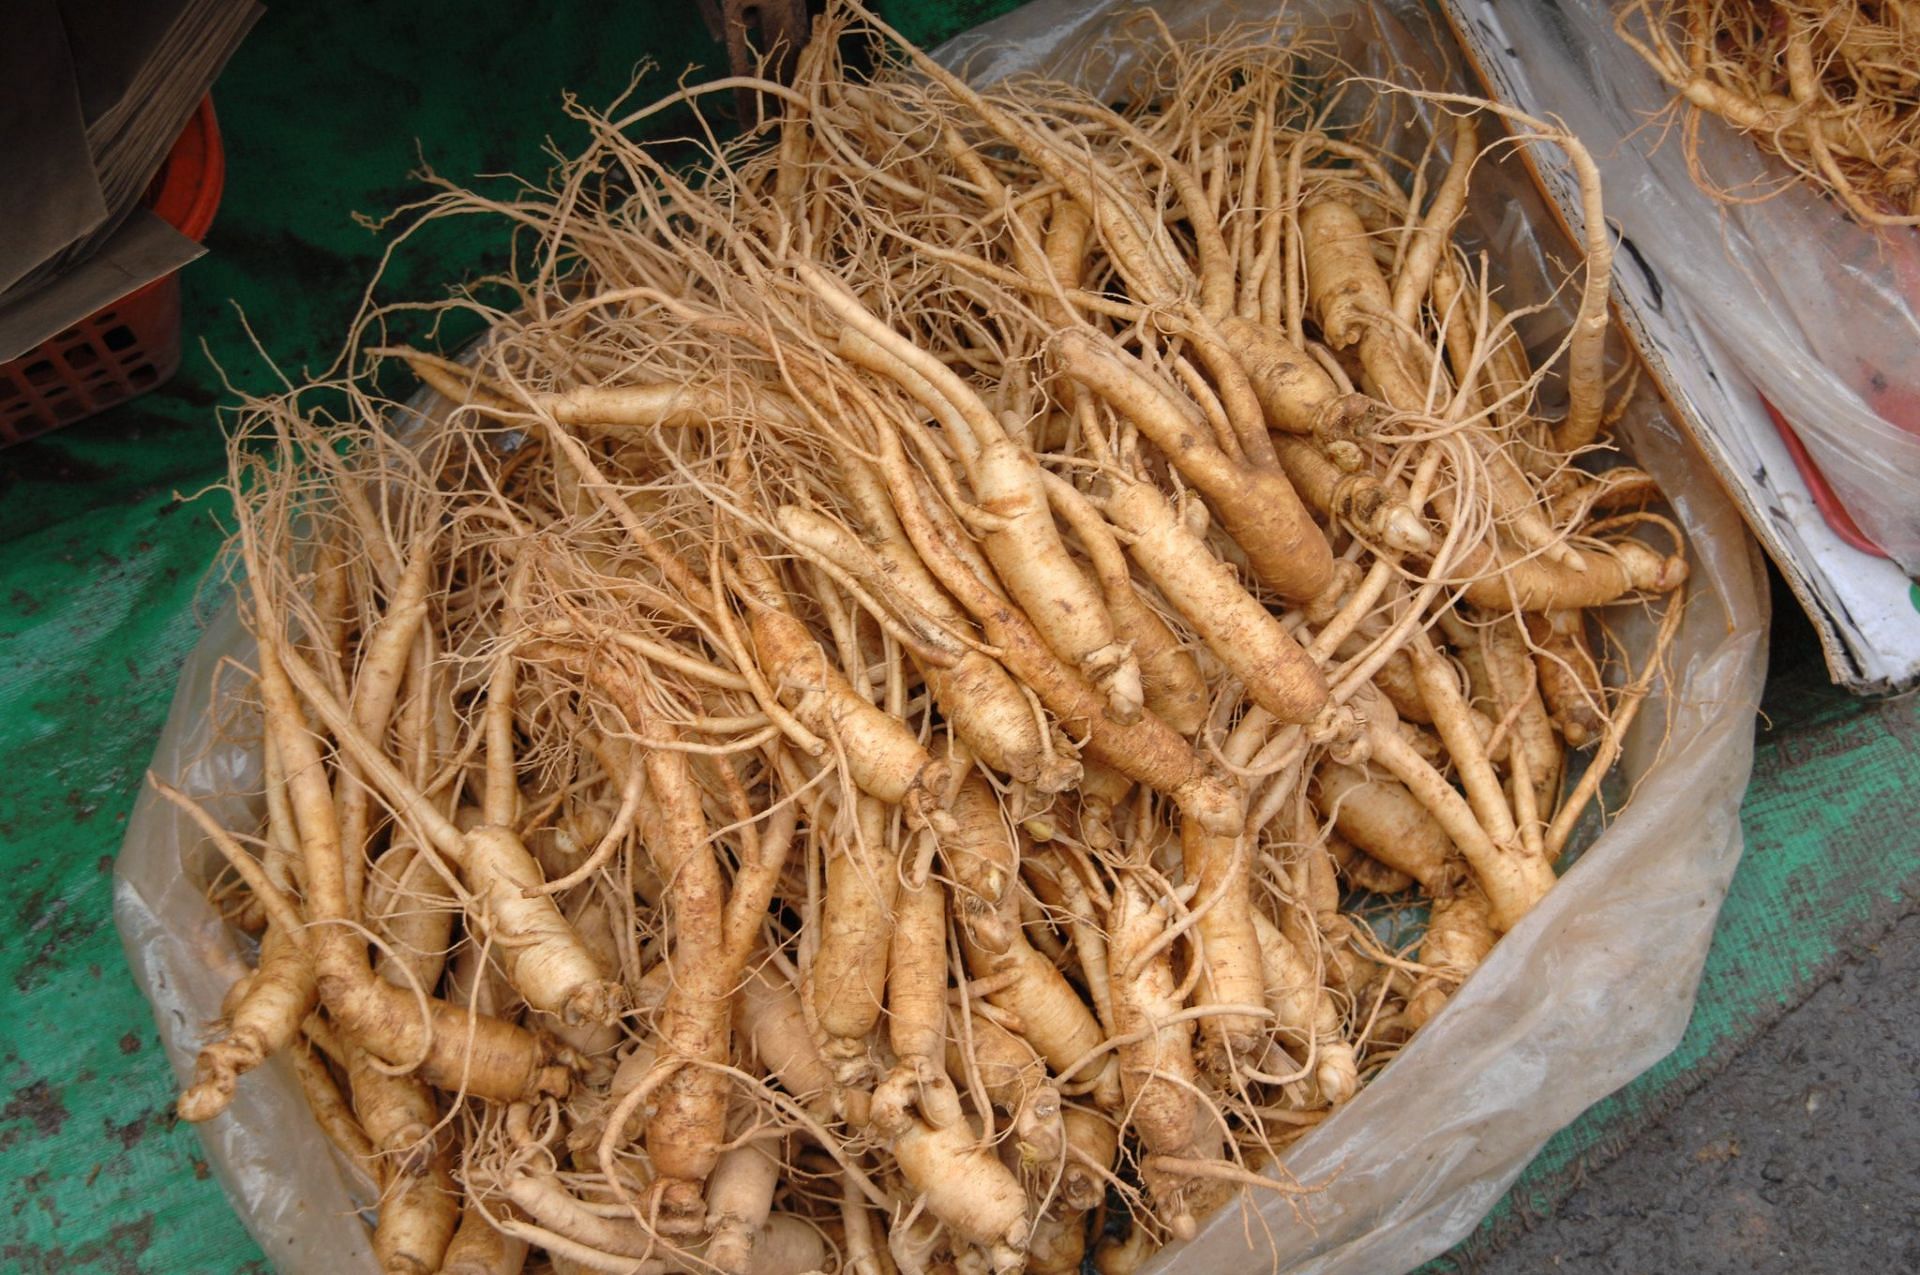 Red ginseng is often used to improve heart health, boost immunity and other health conditions (Image via Flickr)